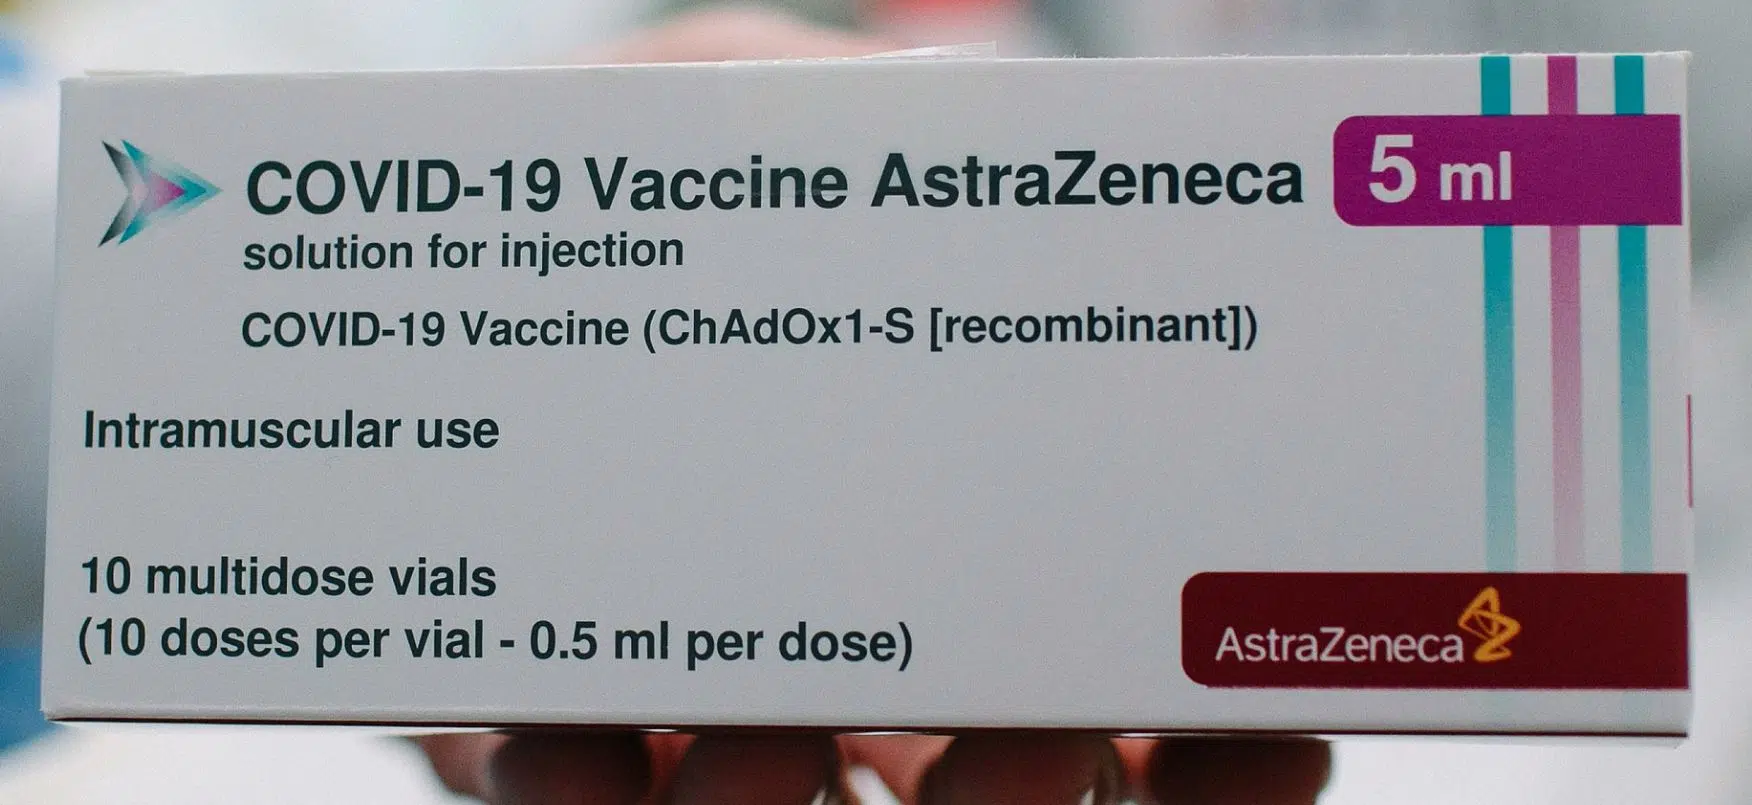 AstraZeneca vaccine now available in pharmacies for all B.C. adults aged 40 and older